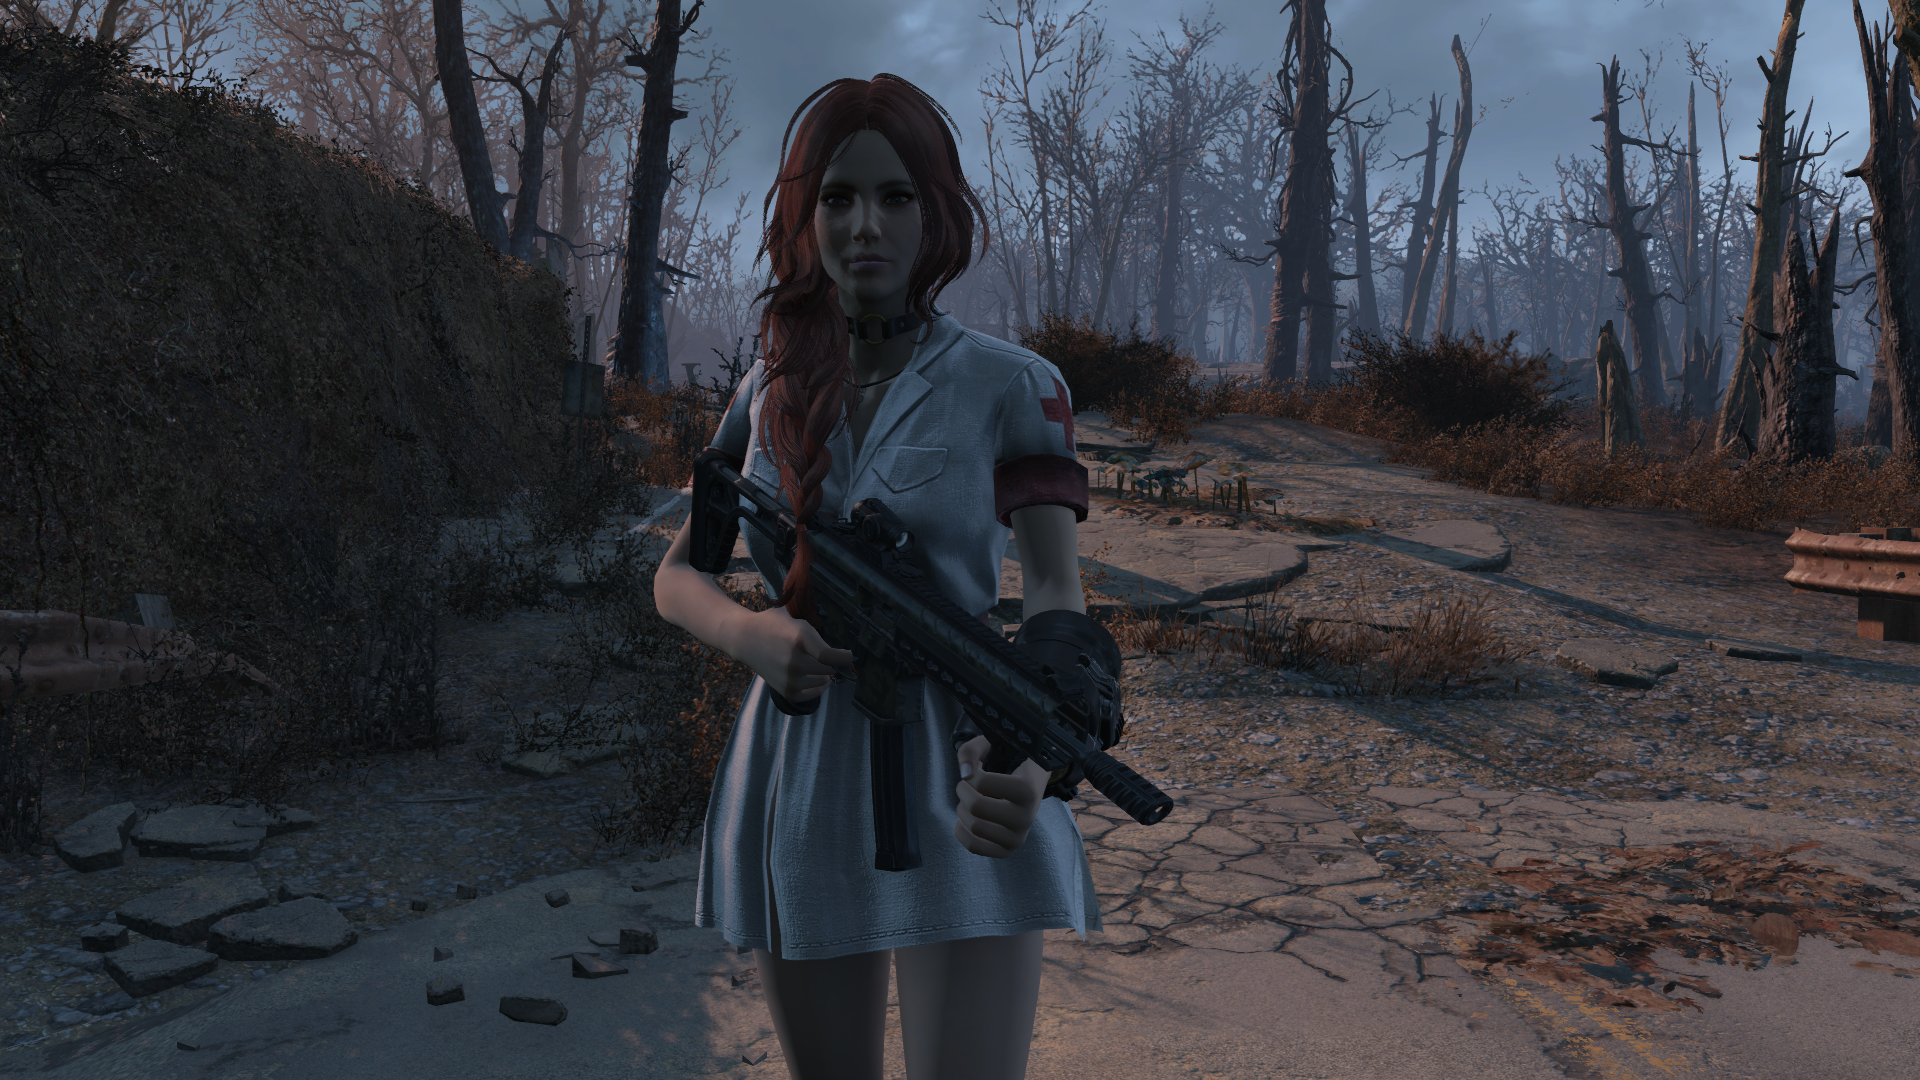 General 1920x1080 Fallout 4 PC gaming video games women futuristic apocalyptic screen shot modding Bethesda Softworks